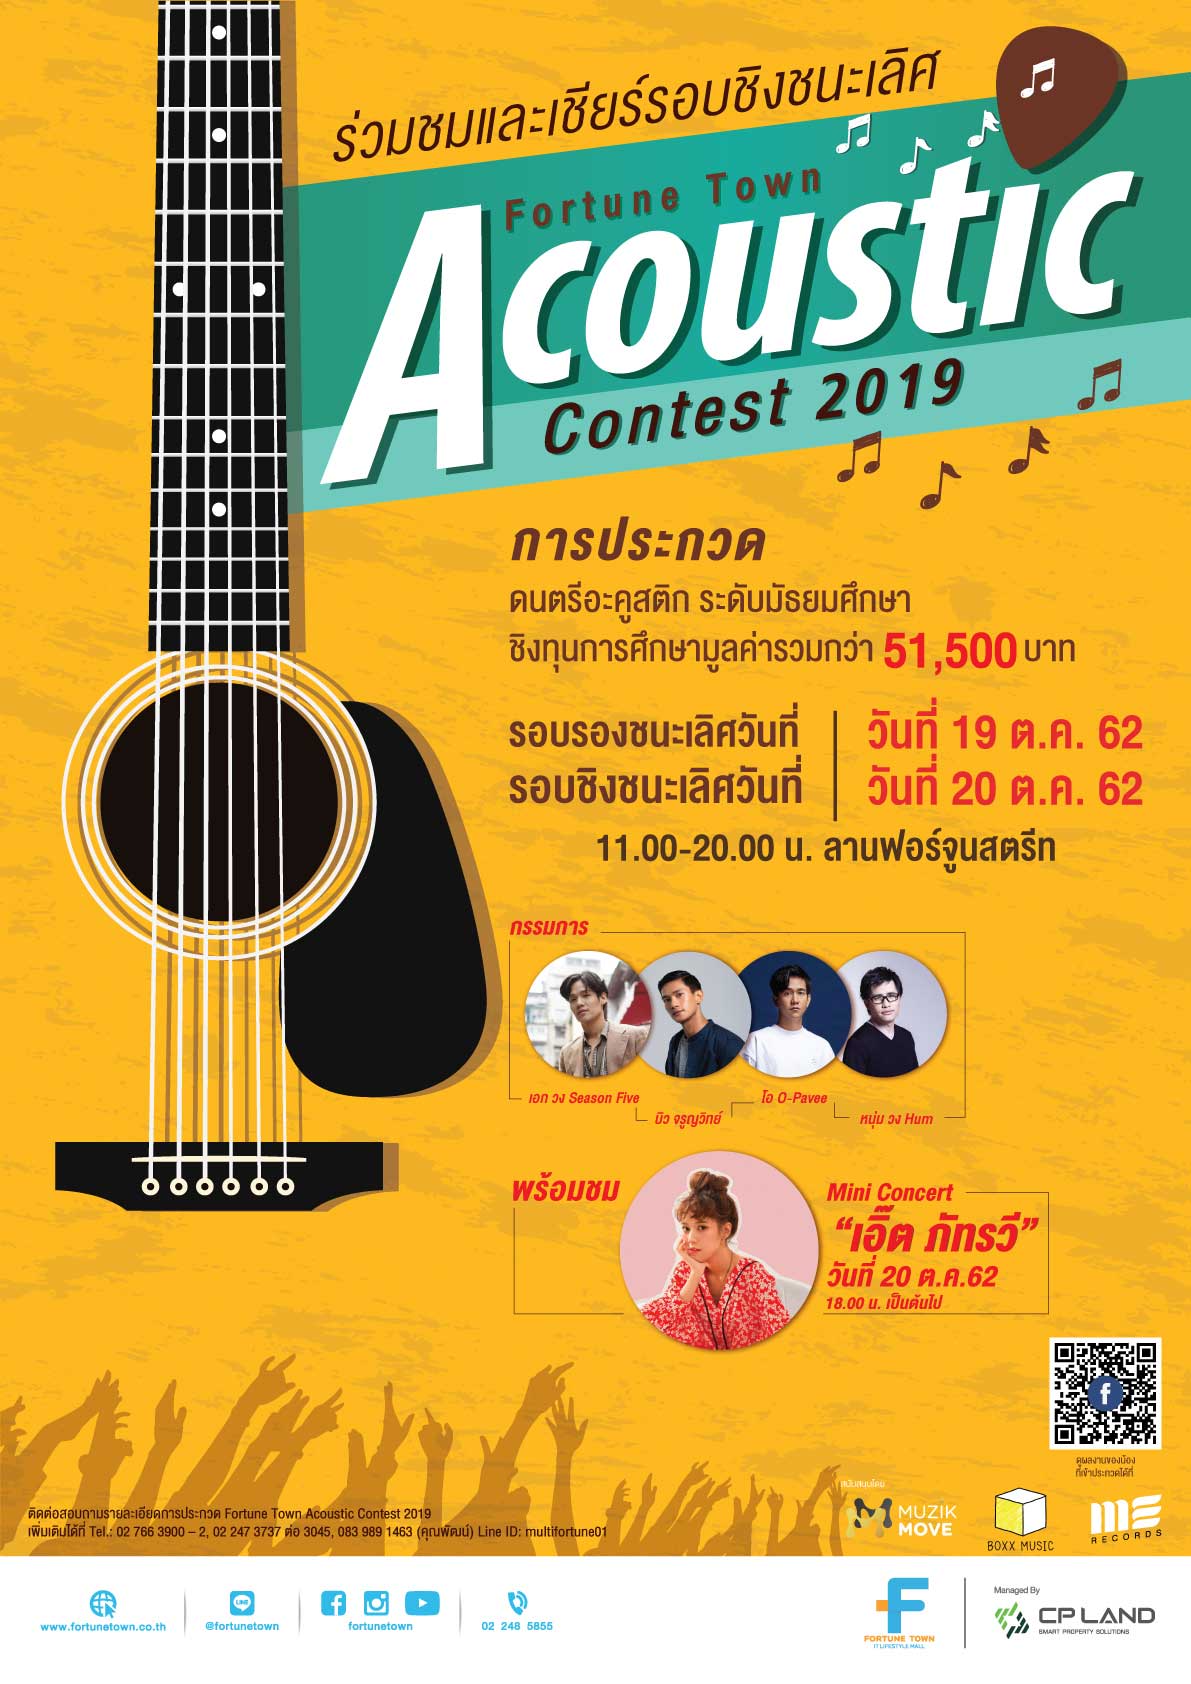 Fortune Town Acoustic Contest 2019